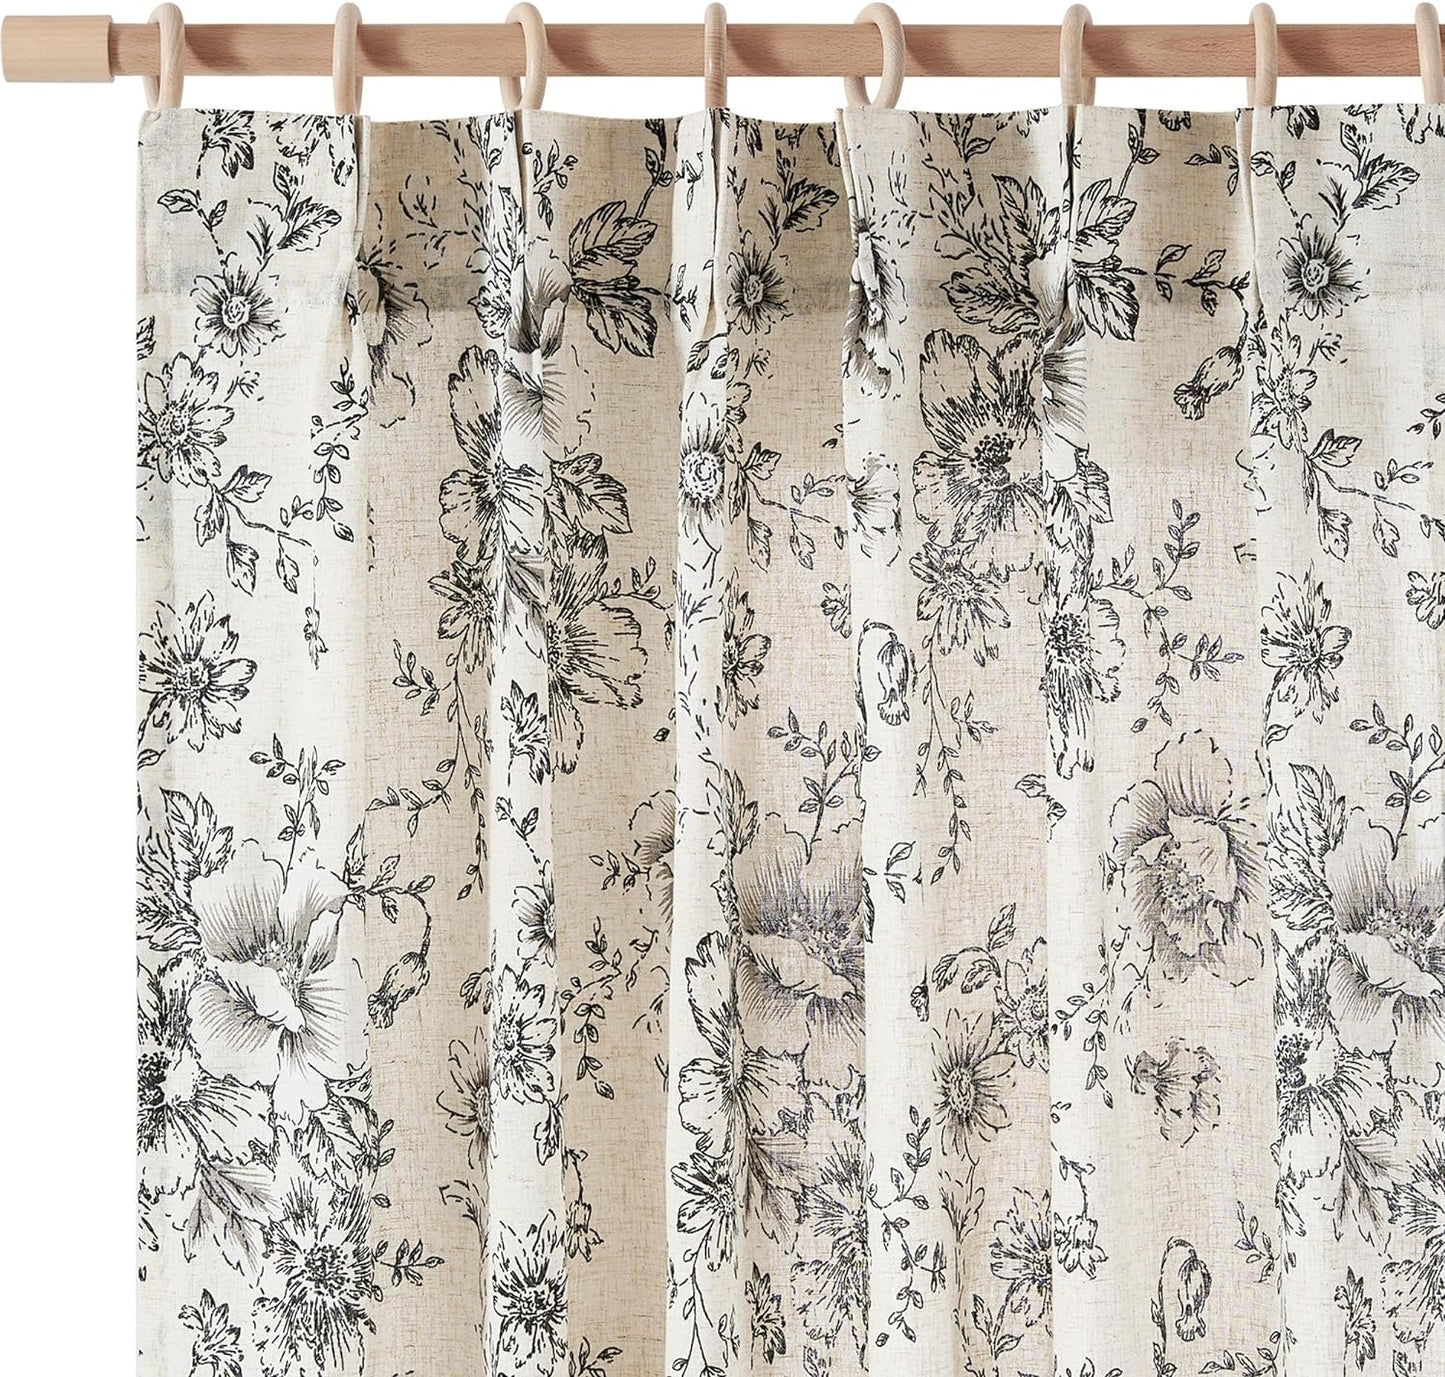 Jinchan Linen Curtains Floral Curtains for Living Room 84 Inch Length Black Printed Curtains Rod Pocket Back Tab Farmhouse Peony Flower Patterned Drapes Bedroom Window Curtain Set 2 Panels  CKNY HOME FASHION Flower Black 40"W X 84"L 